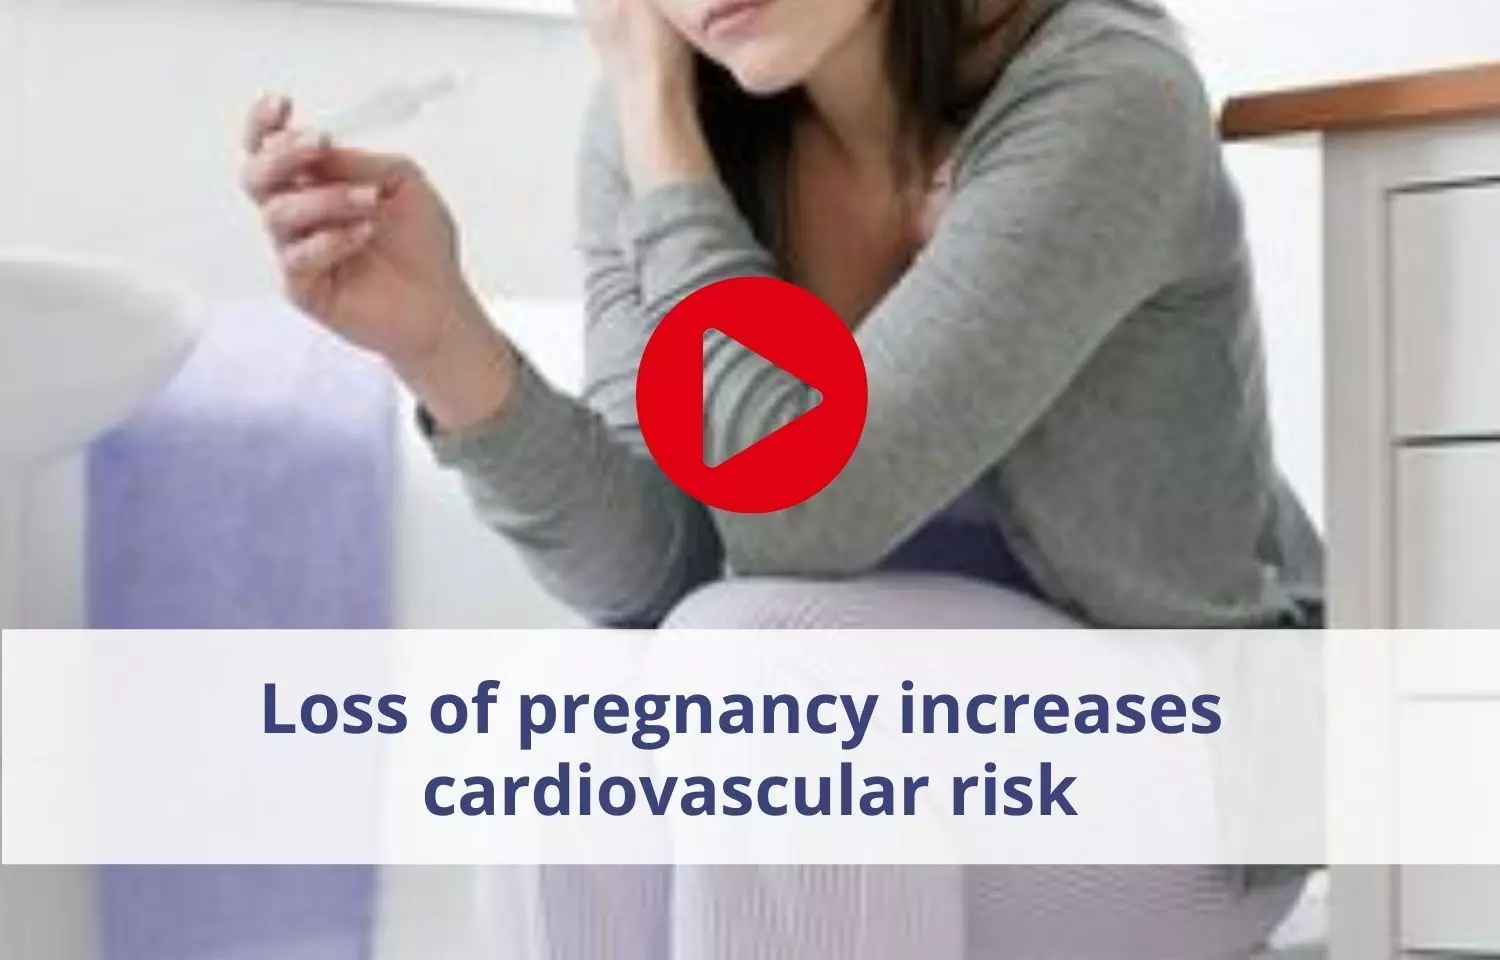 Loss of pregnancy increases cardiovascular risk